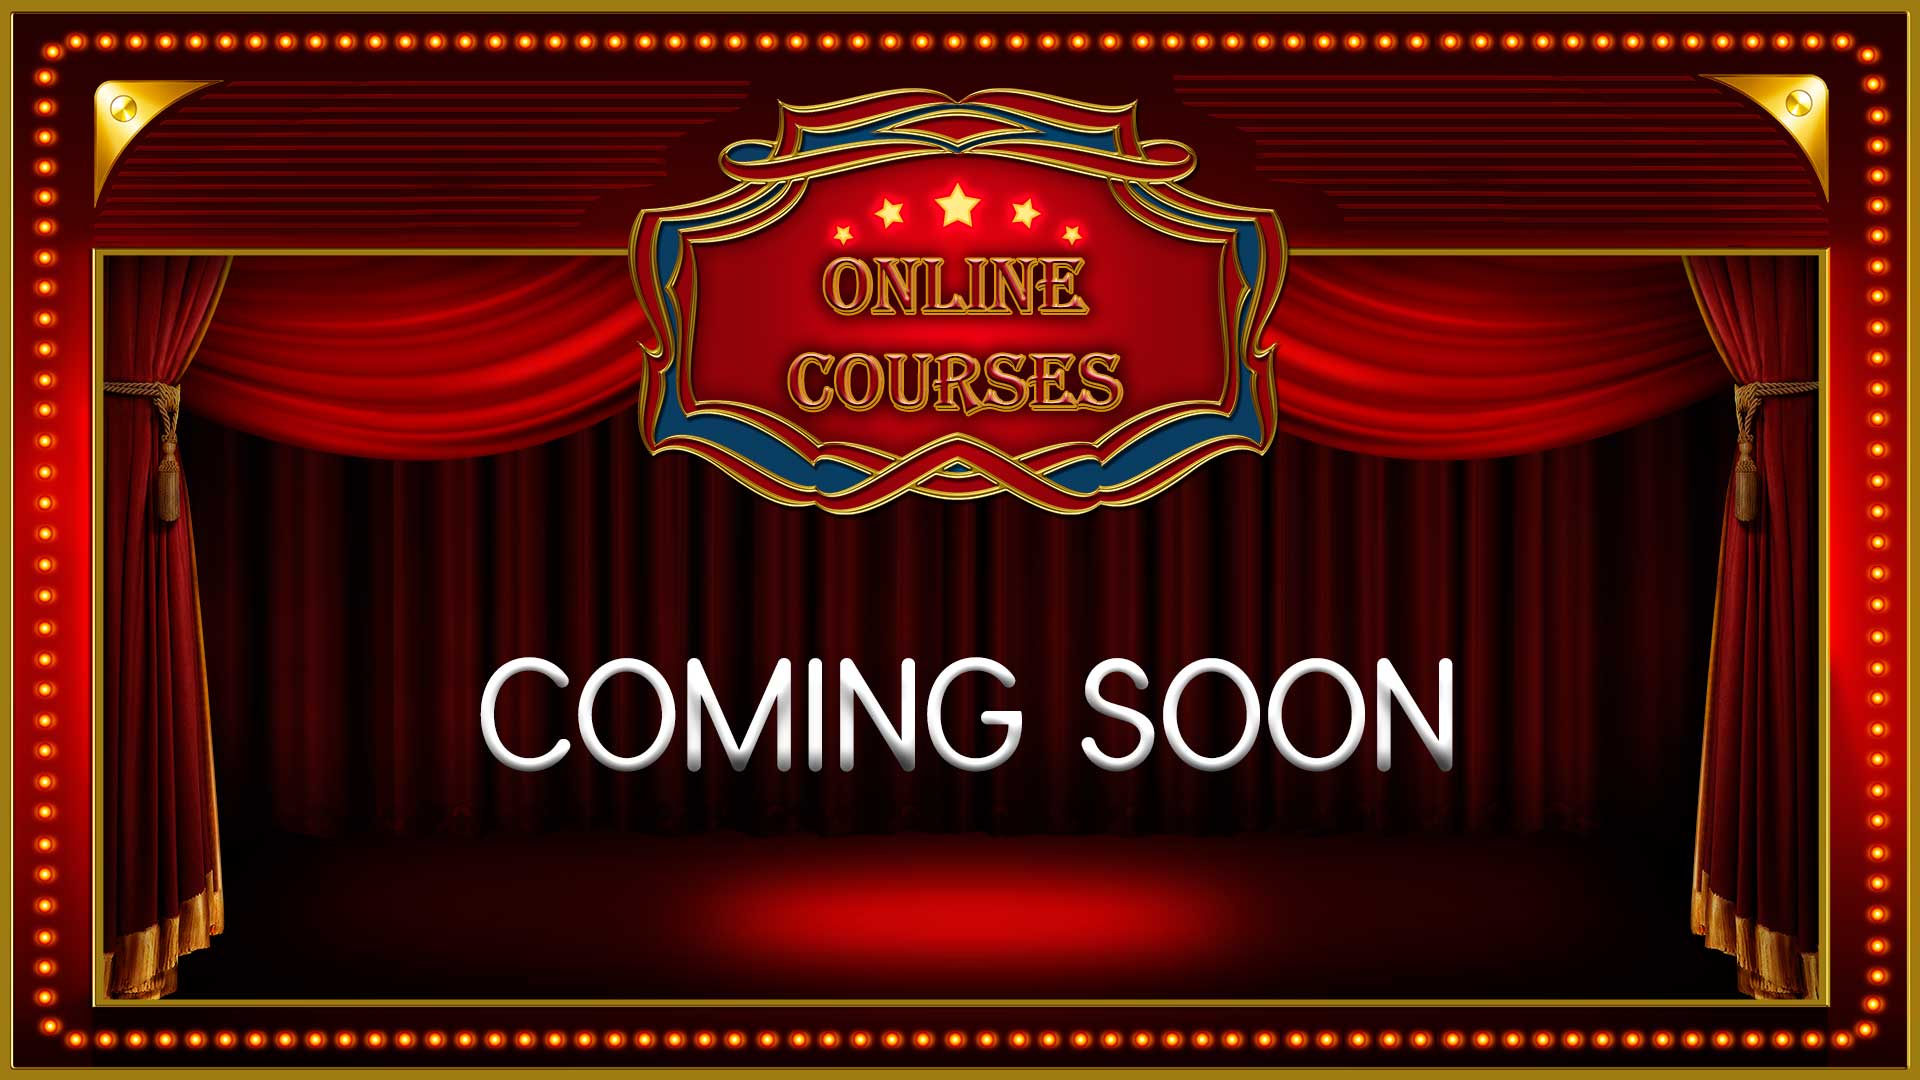 Online Courses Coming Soon Placard